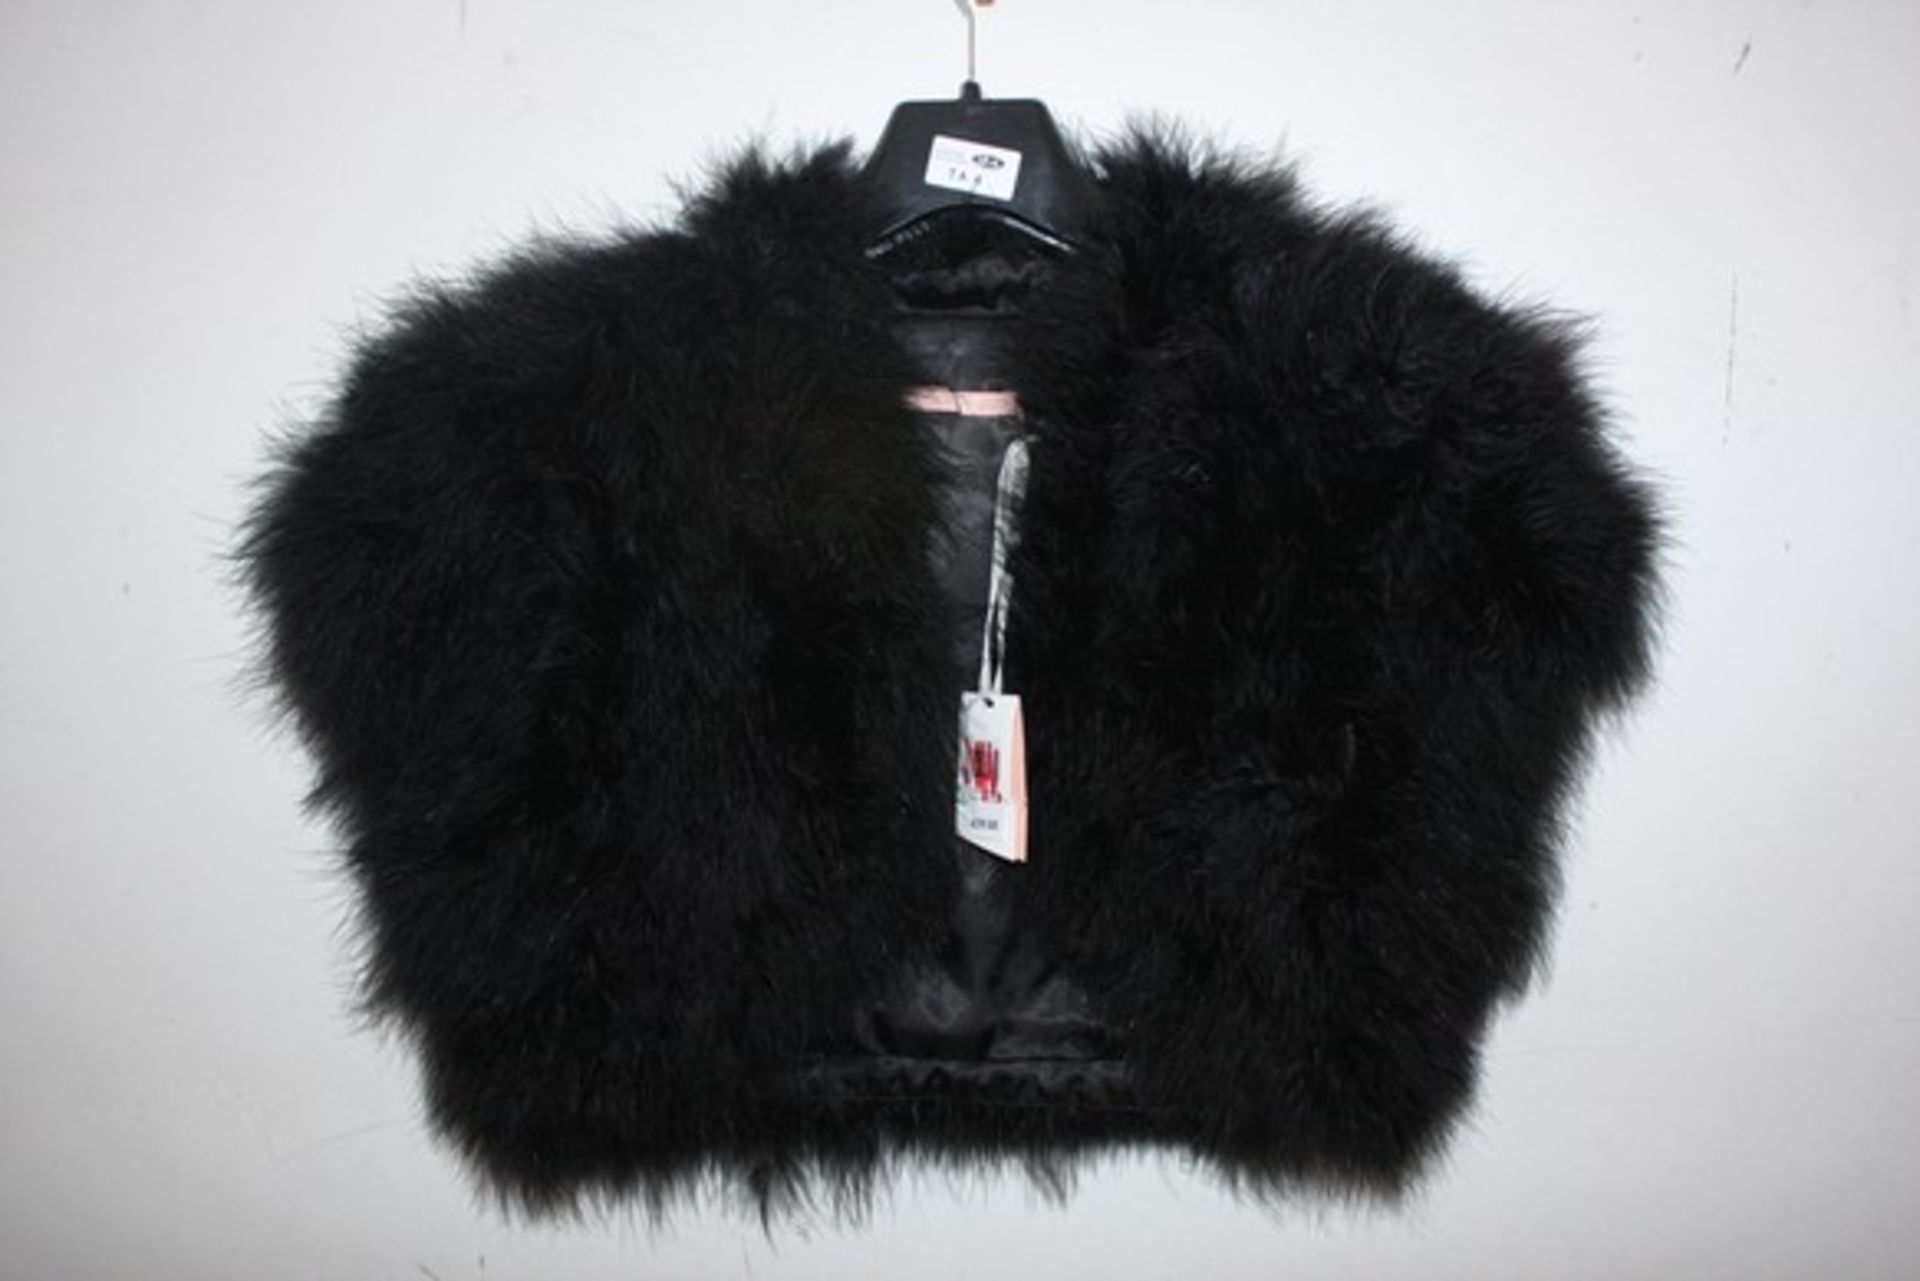 ONE BRAND NEW HARPER MARABOU COVER UP IN BLACK SIZE L RRP £59 (DS-AW (MK) CAGE SF3 21432233)